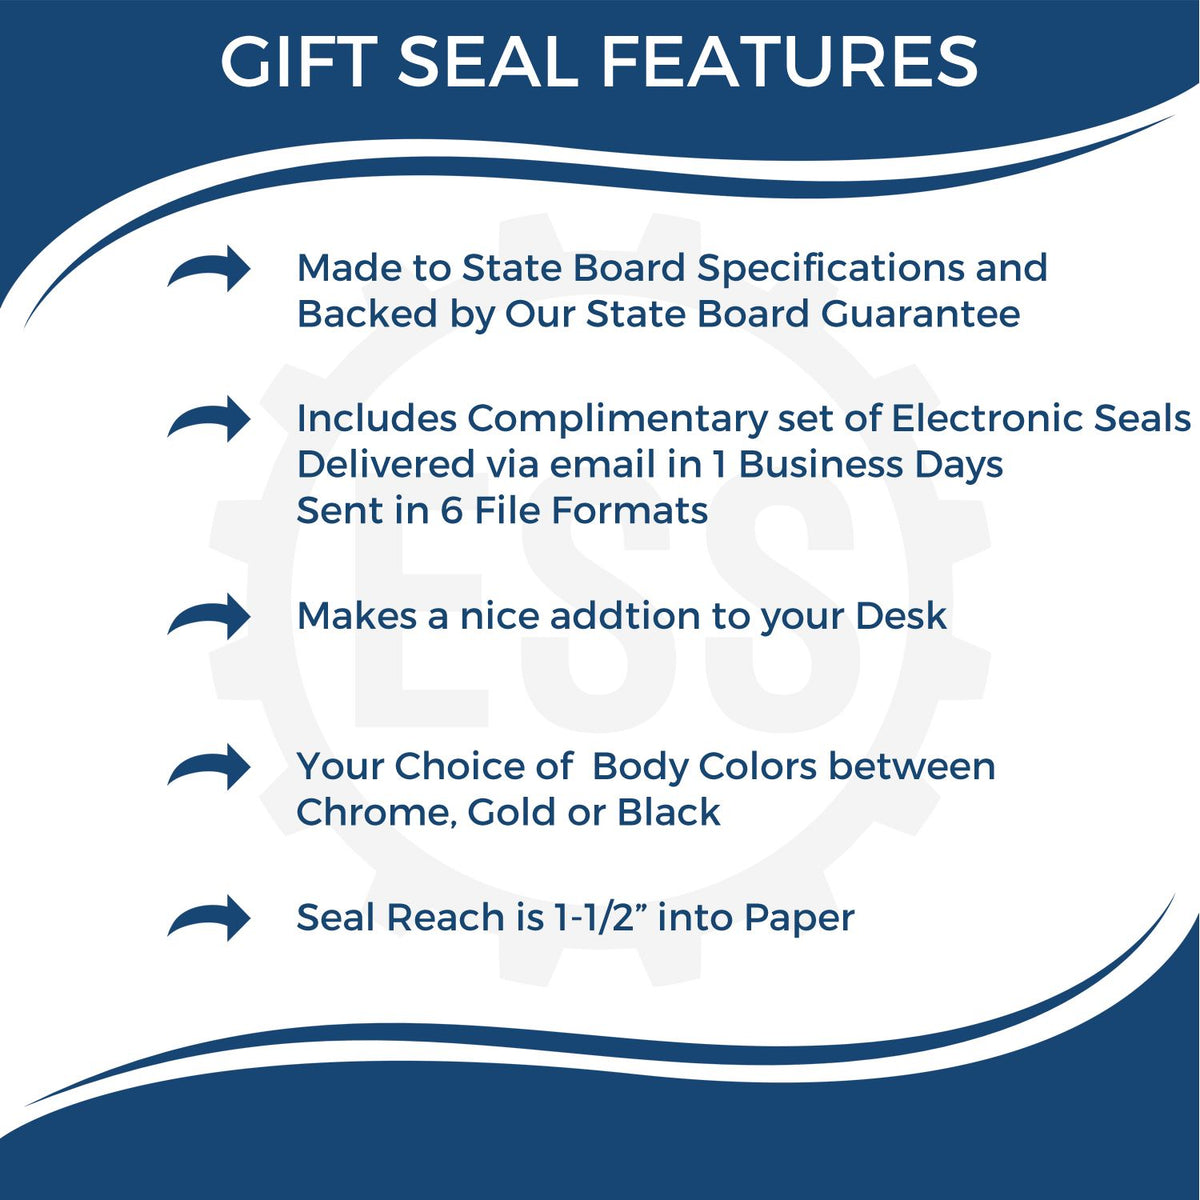 A picture of an infographic highlighting the selling points for the Gift Nevada Architect Seal